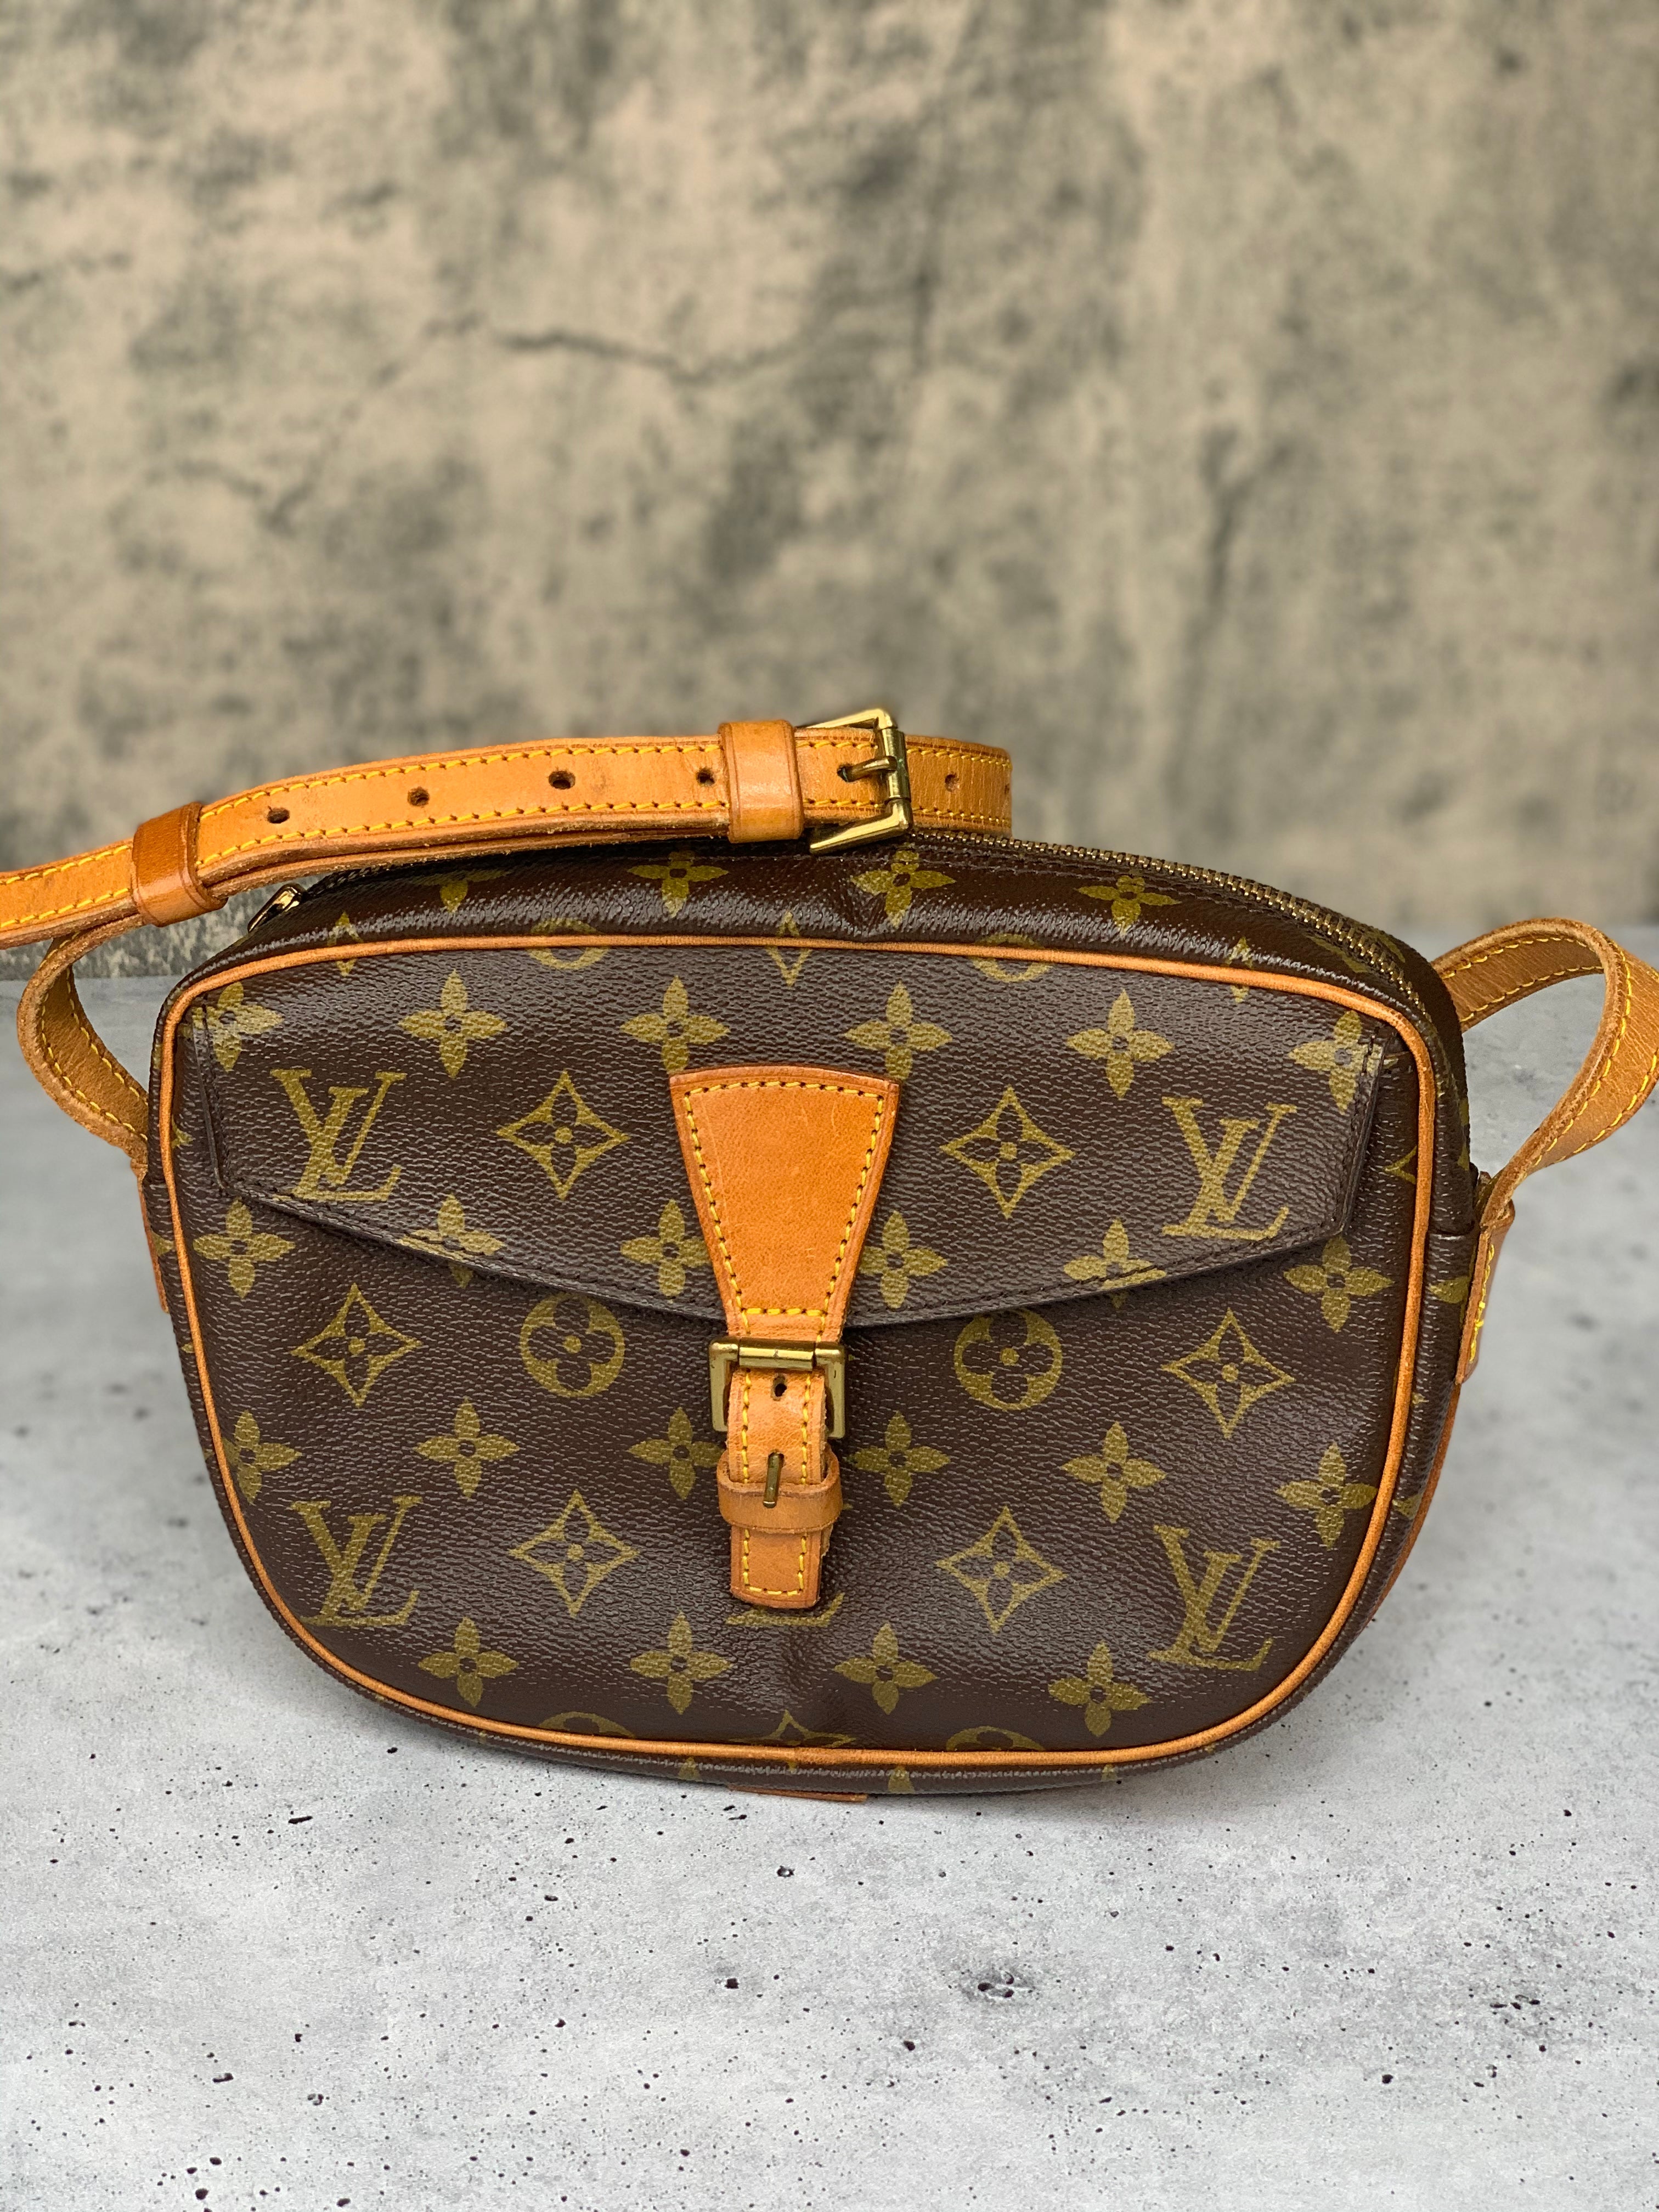 Vintage Louis Vuitton Trocadero Bag With Monogram From the -  Israel